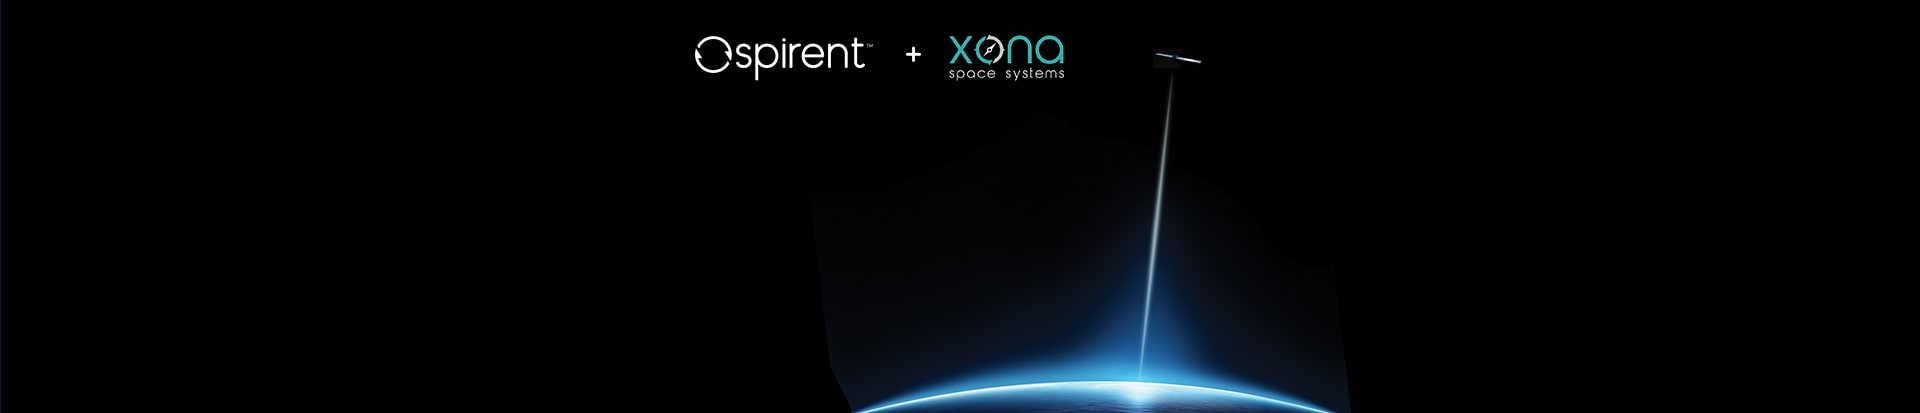 Xona Space Systems Signal Simulator for testing and integration